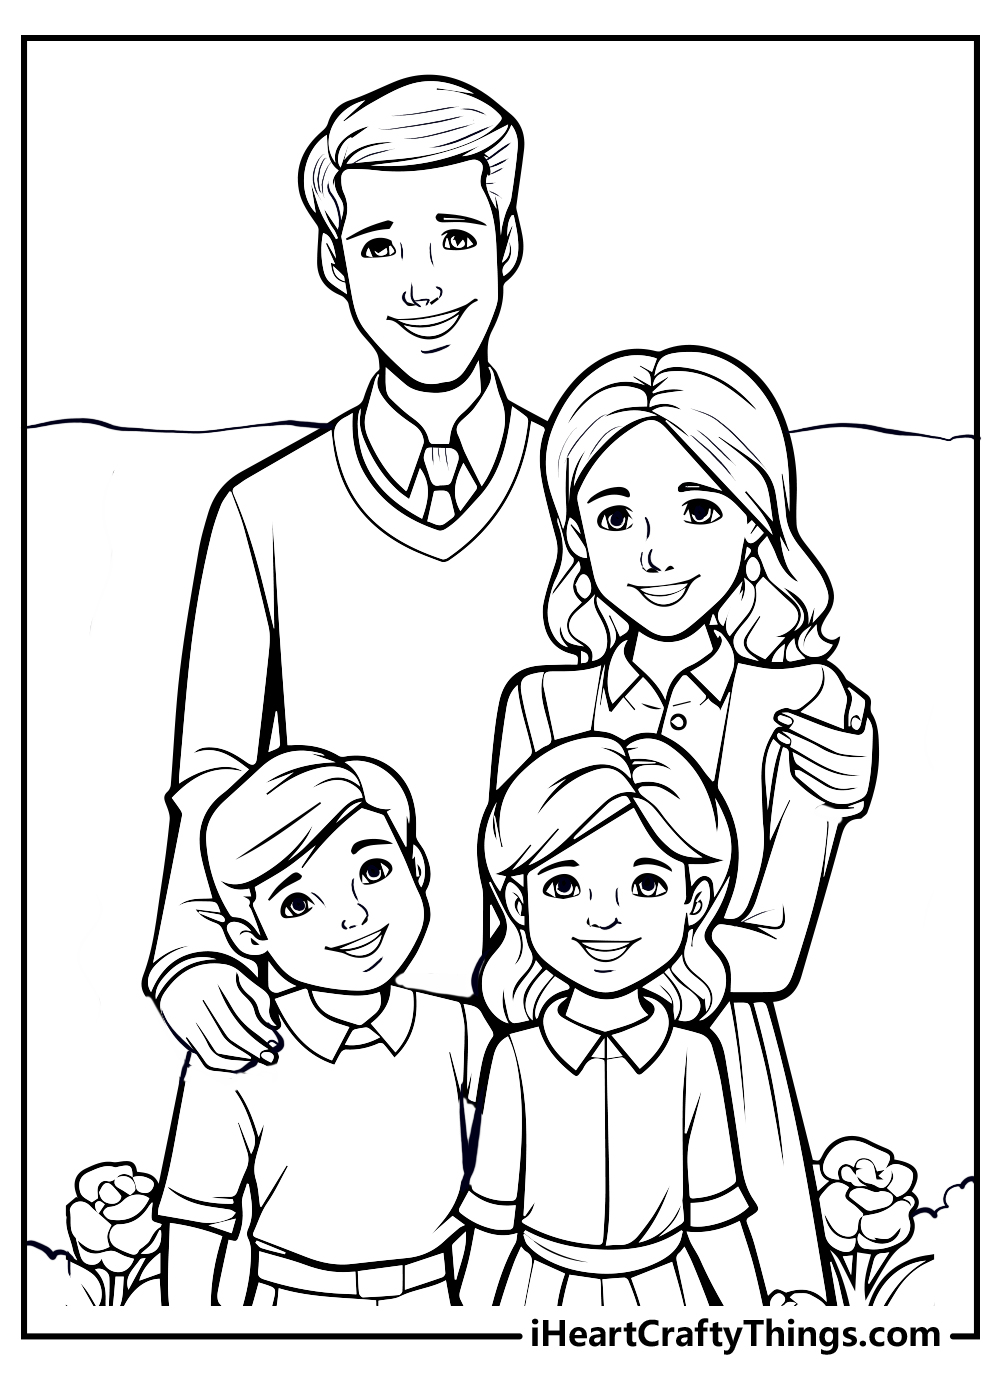 Free Printable Coloring Pages for Kids - Charlottesville Family